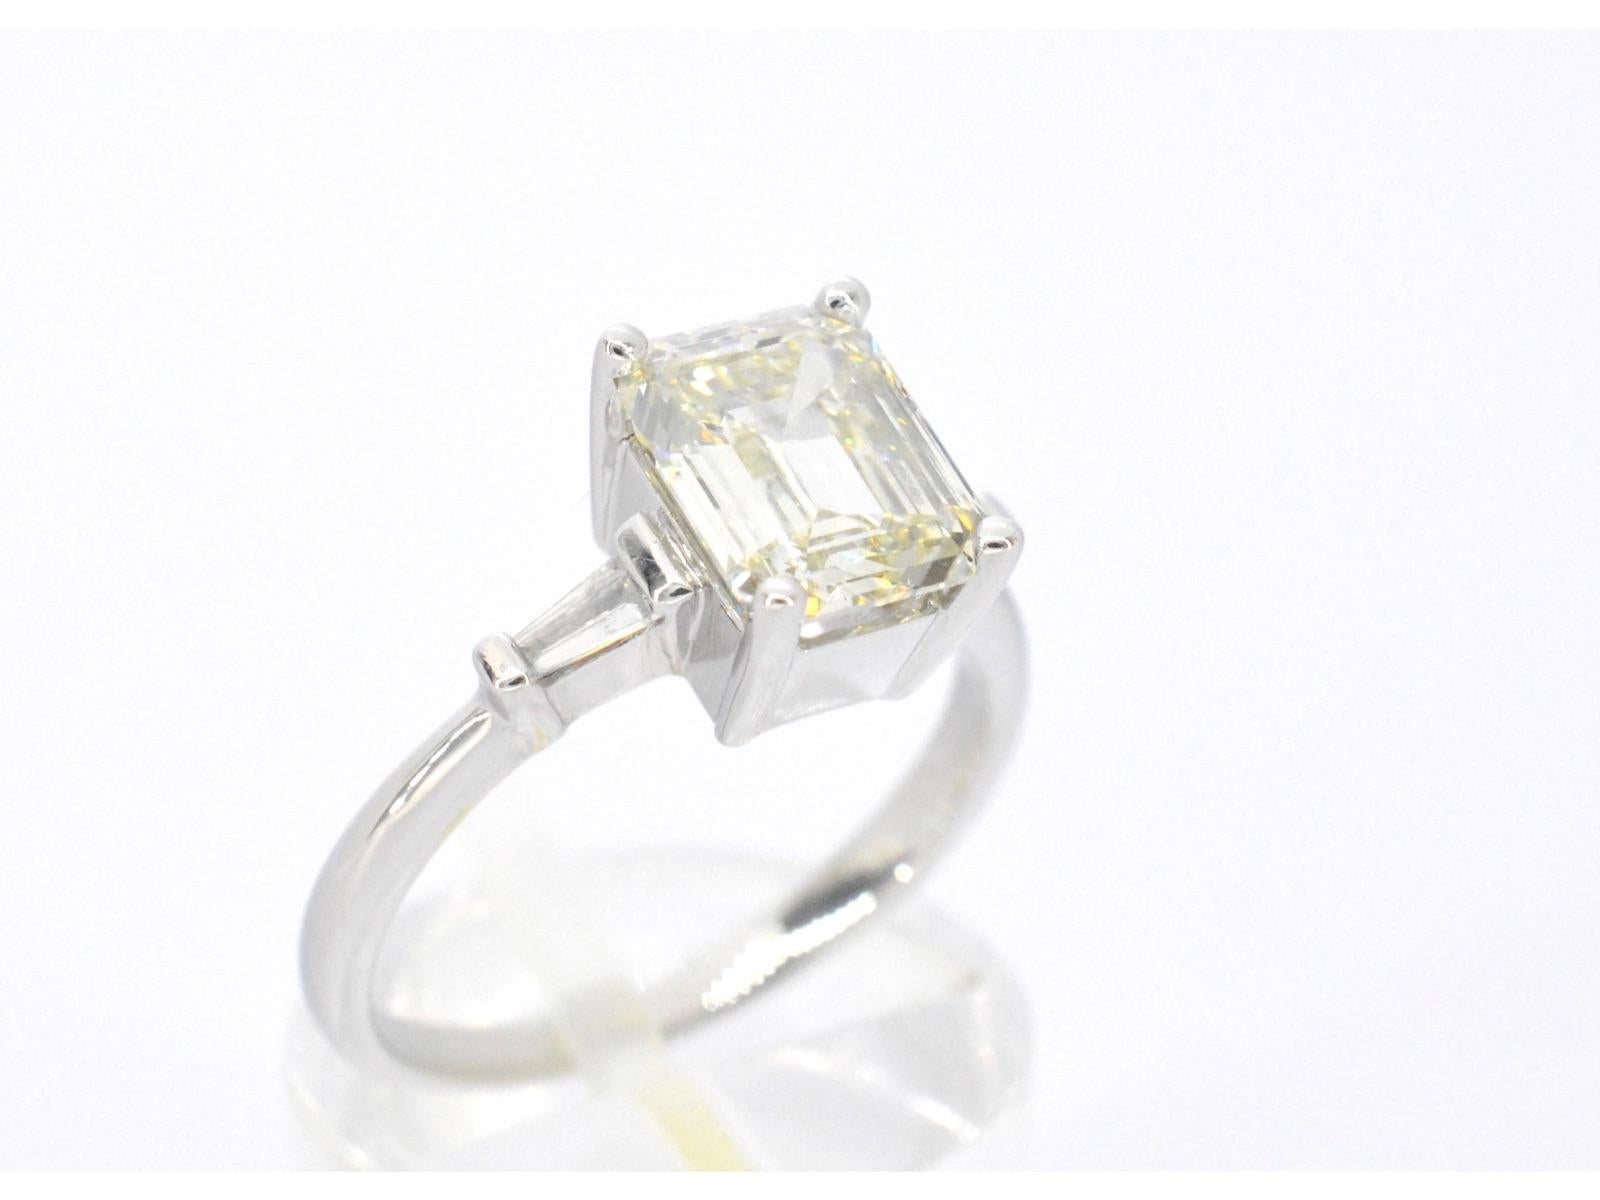 Emerald Cut Gold Ring with Diamonds